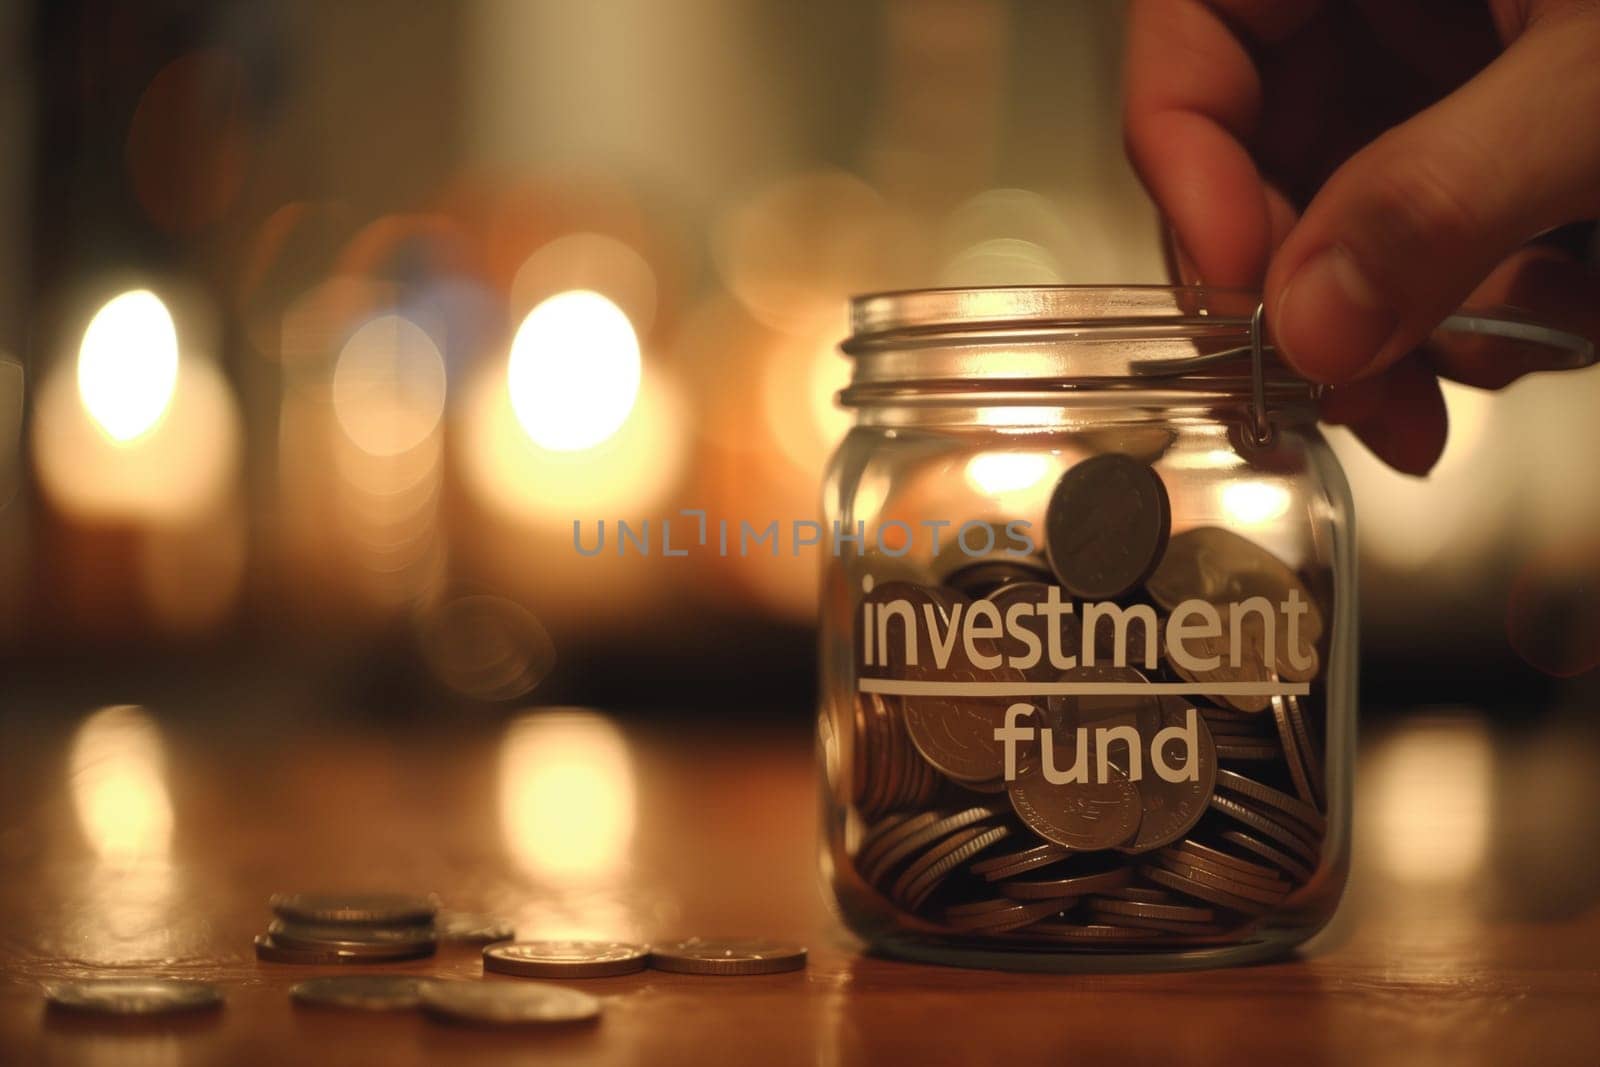 A hand places a coin into a jar labeled investment fund on a wooden table. The background is softly lit, creating a warm ambiance.